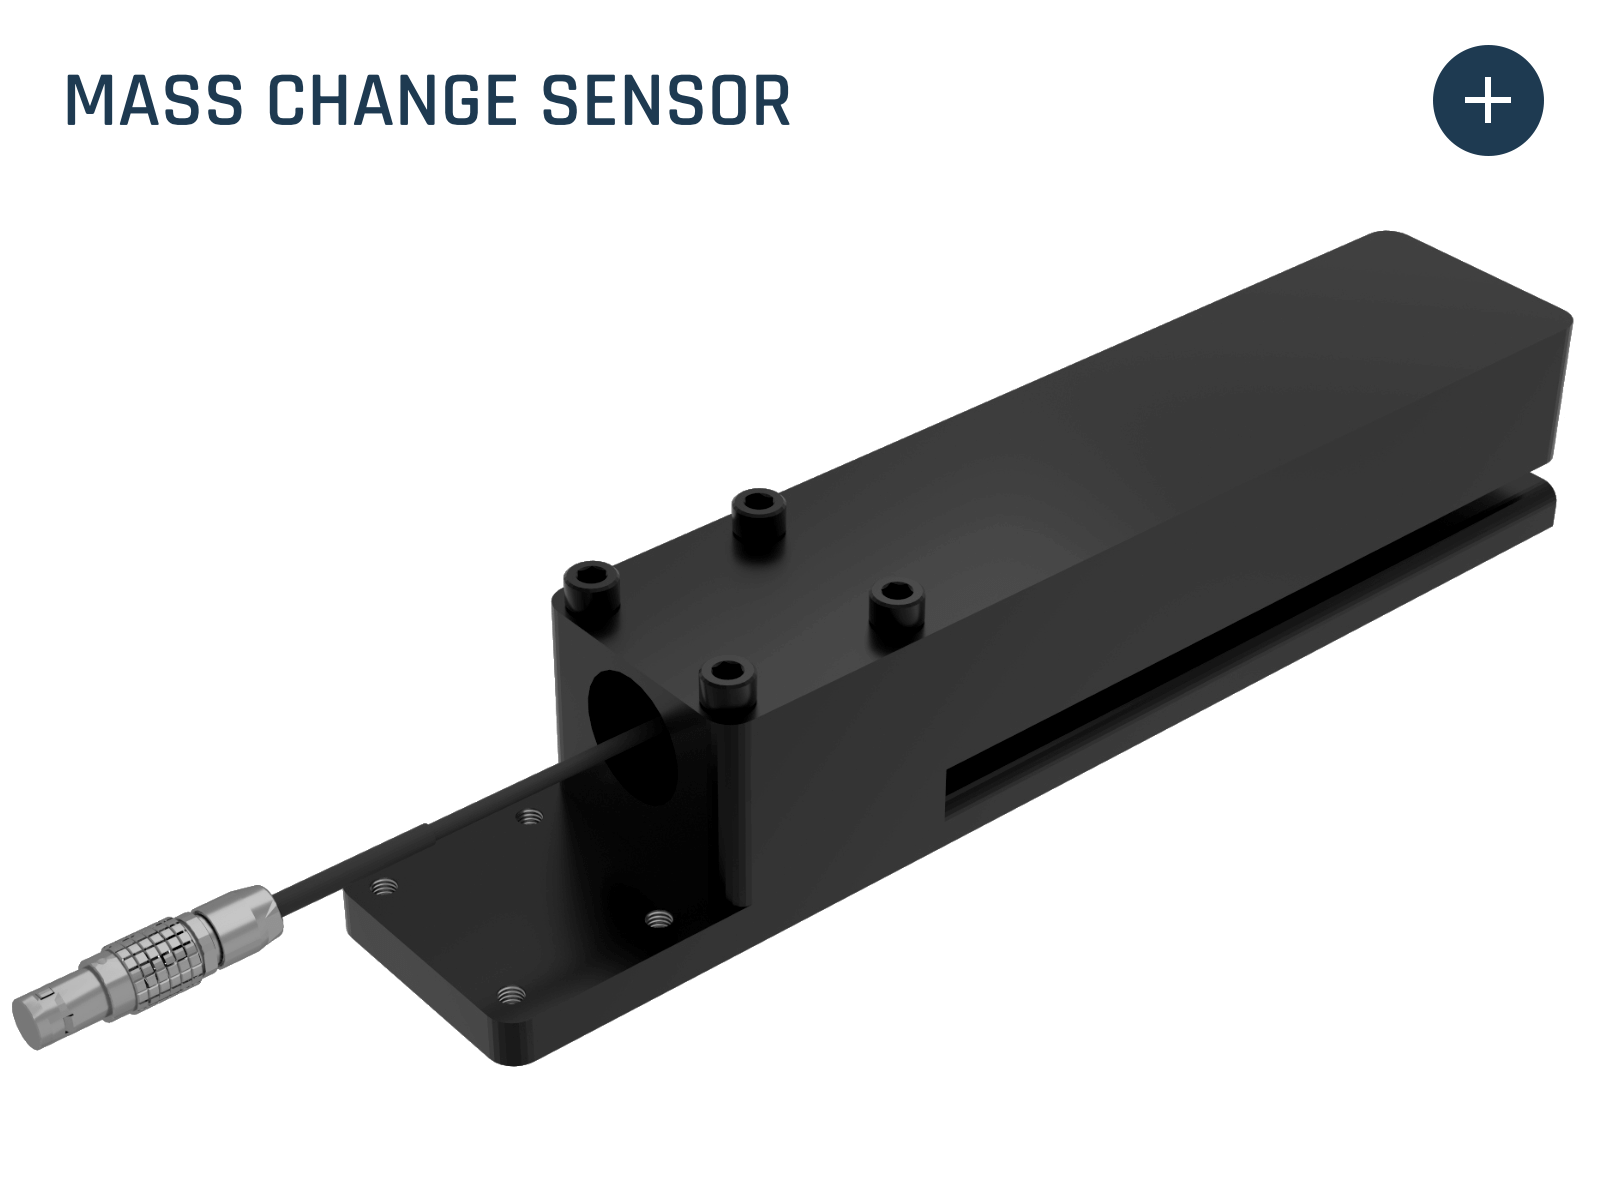 Click here to learn more about the Mass Change Sensor